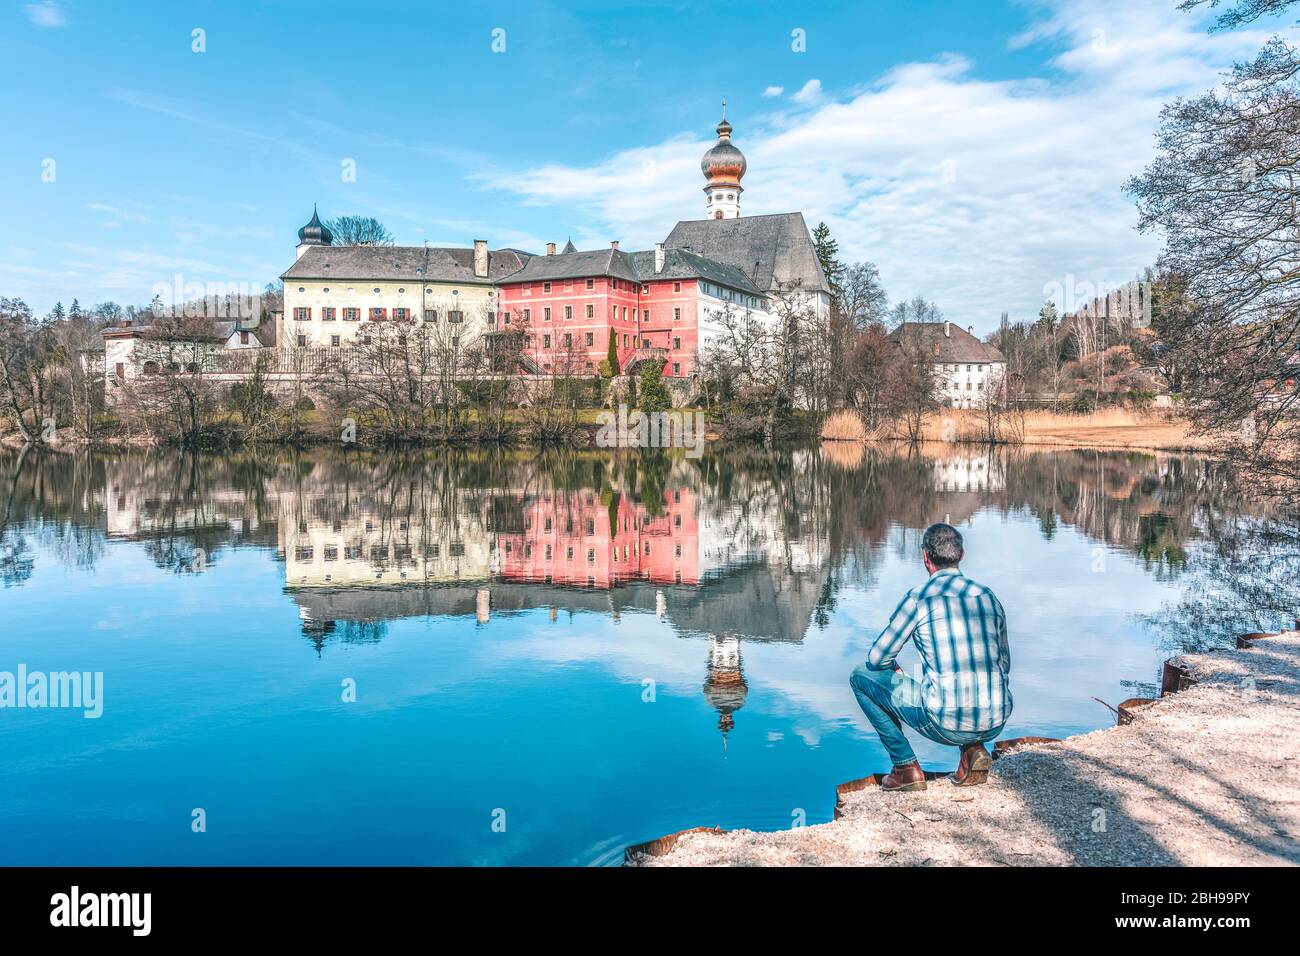 One man tourist looking the Höglwörth abbey of St Peter and Paul, Aaugustinian monastery near Anger, Rupertiwinkel, Upper Bavaria, Germany Stock Photo